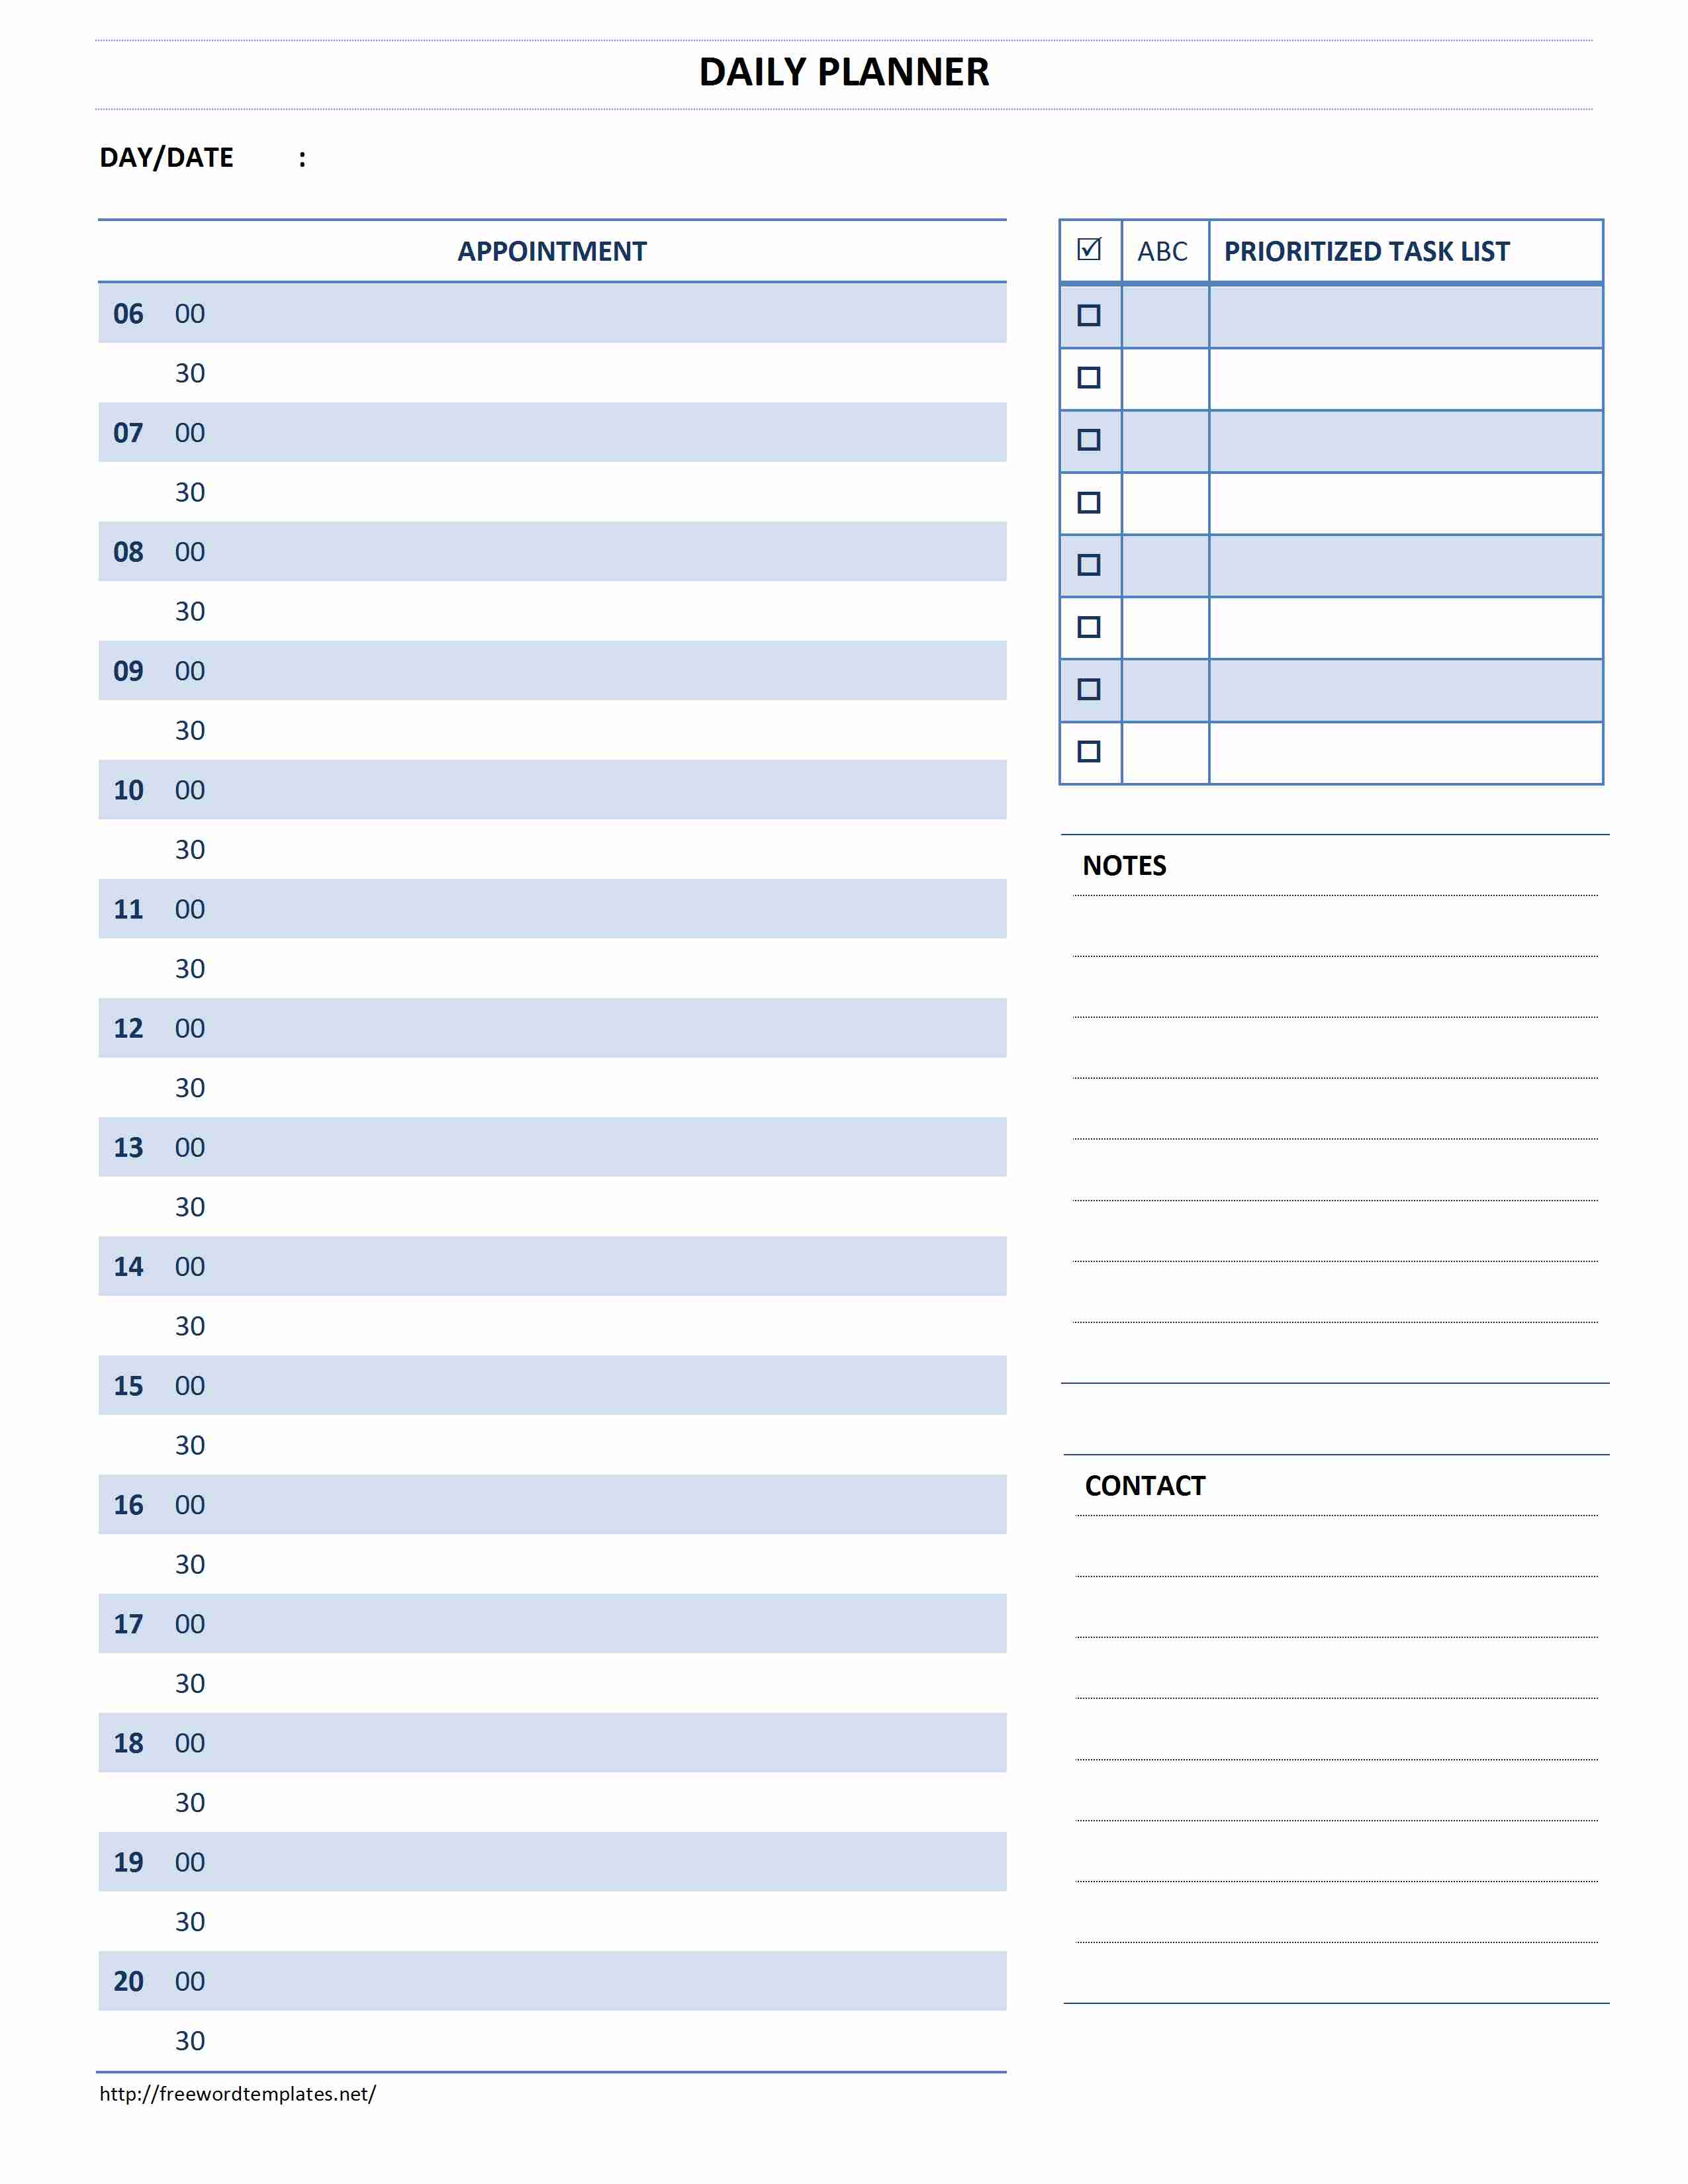 daily-planner-template-word